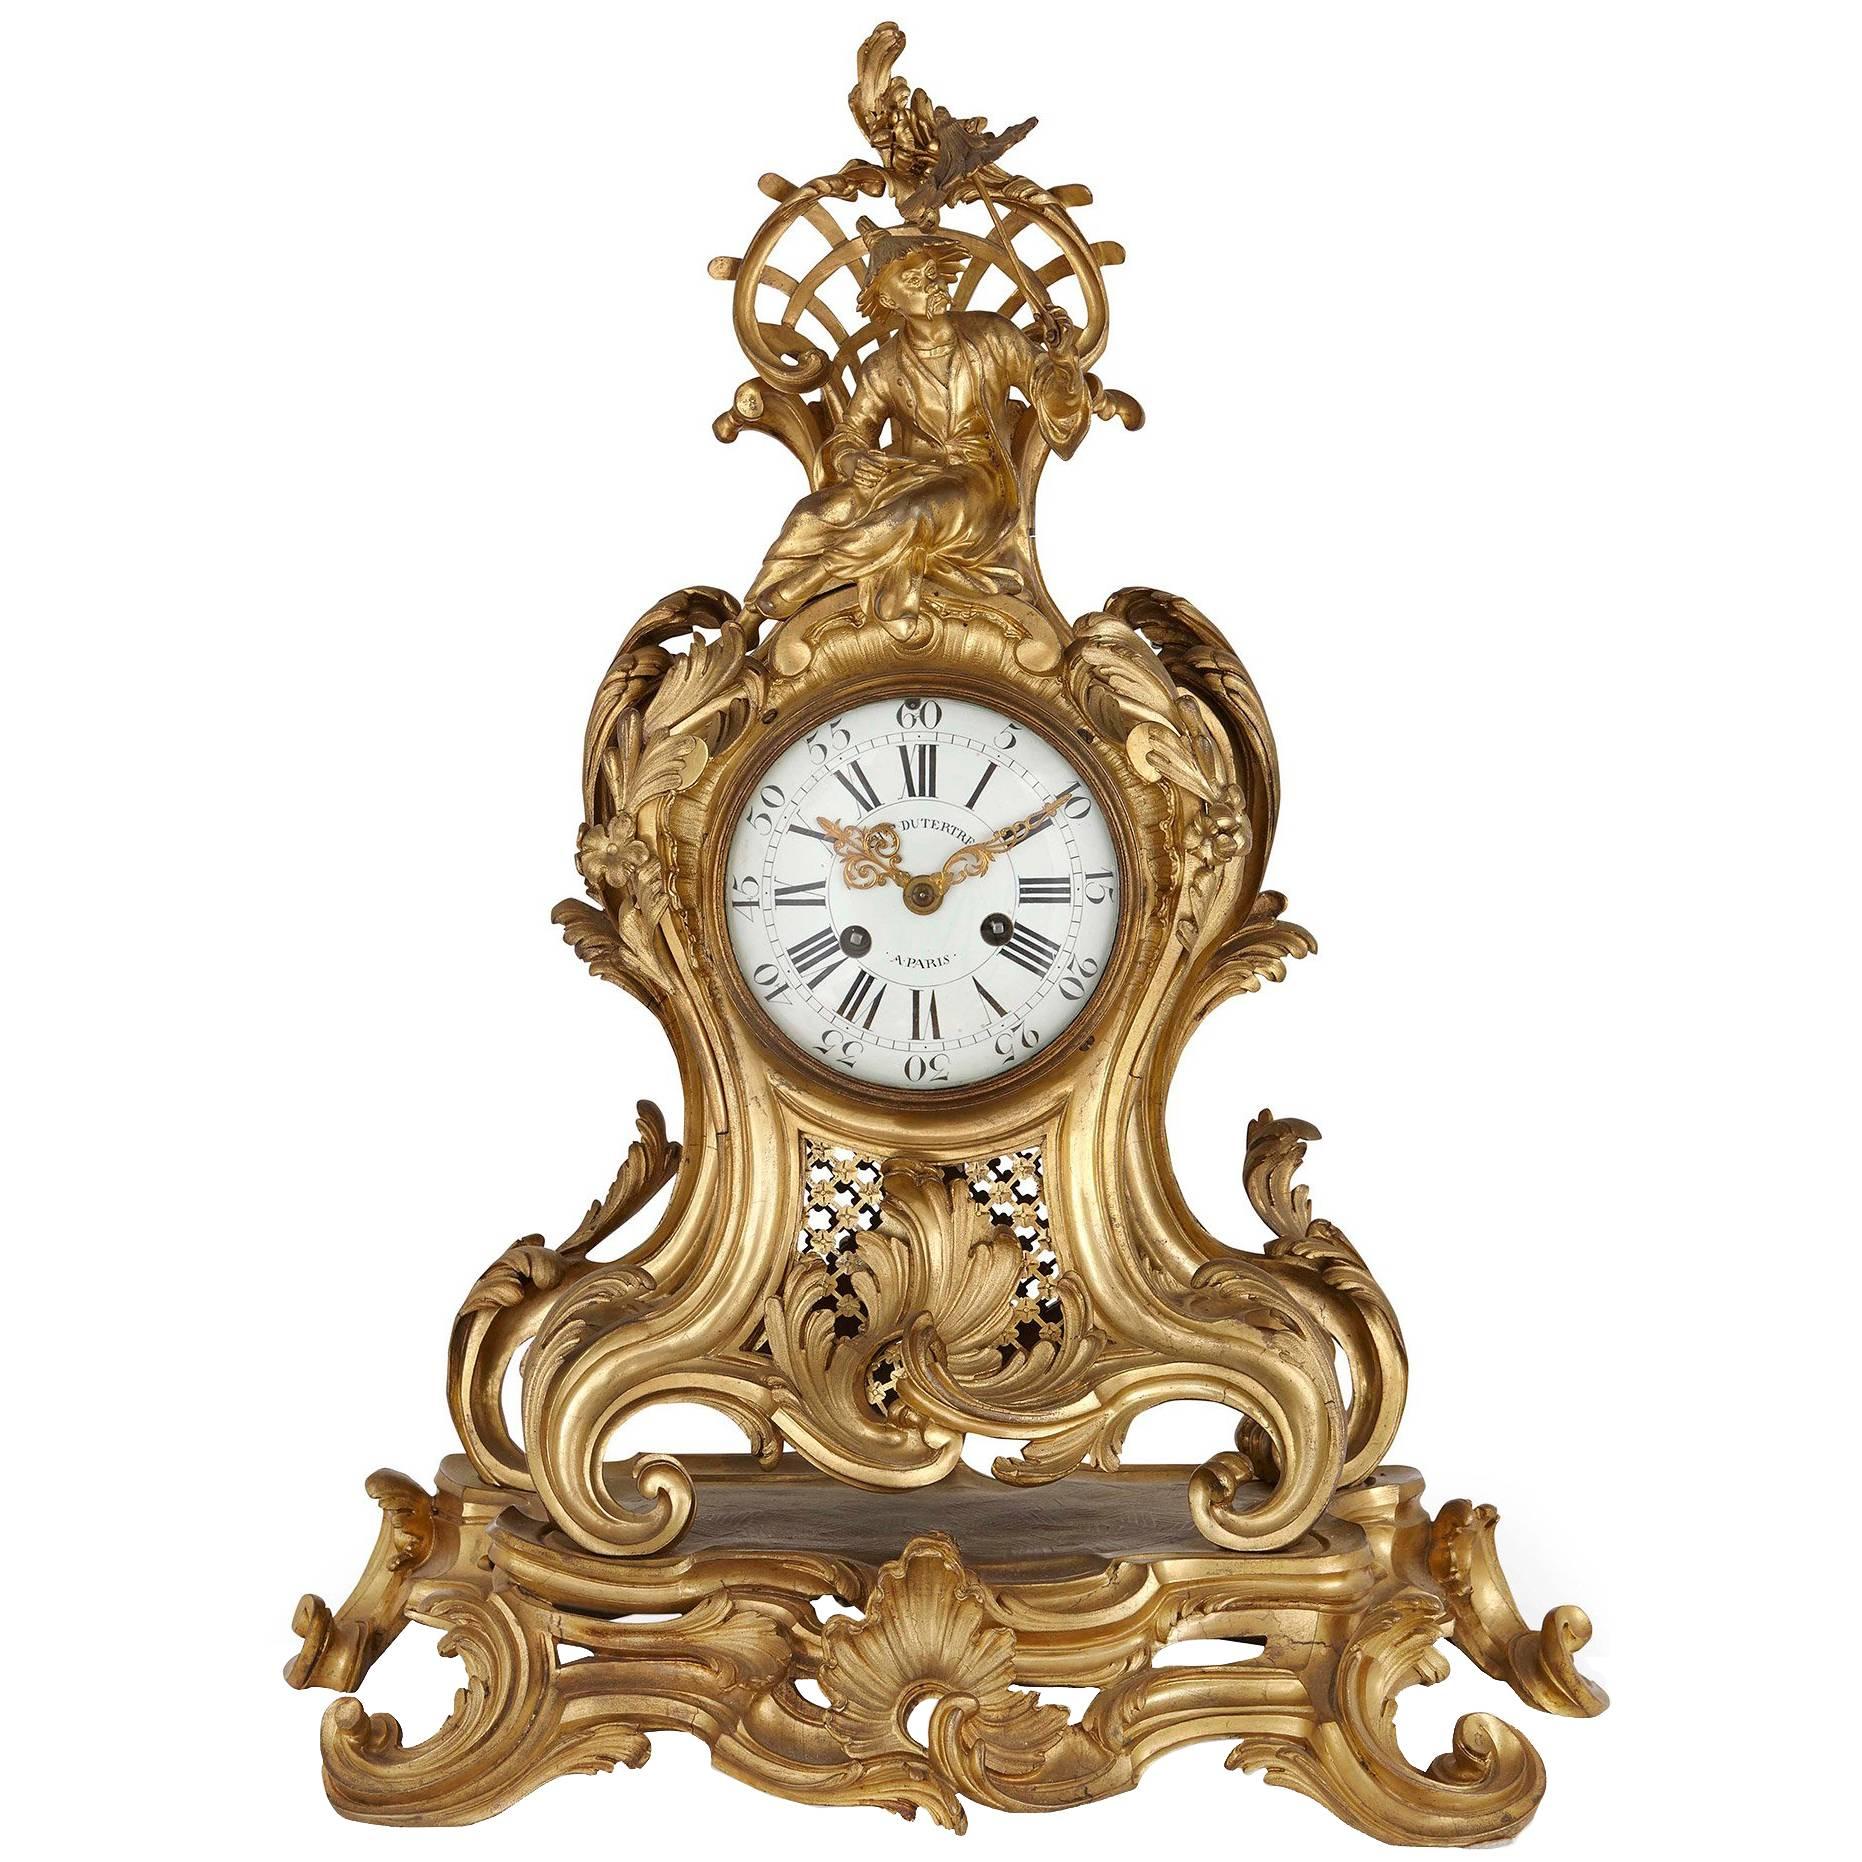 Louis XV ormolu mantel clock by Charles du Tertre, in the Chinoiserie style